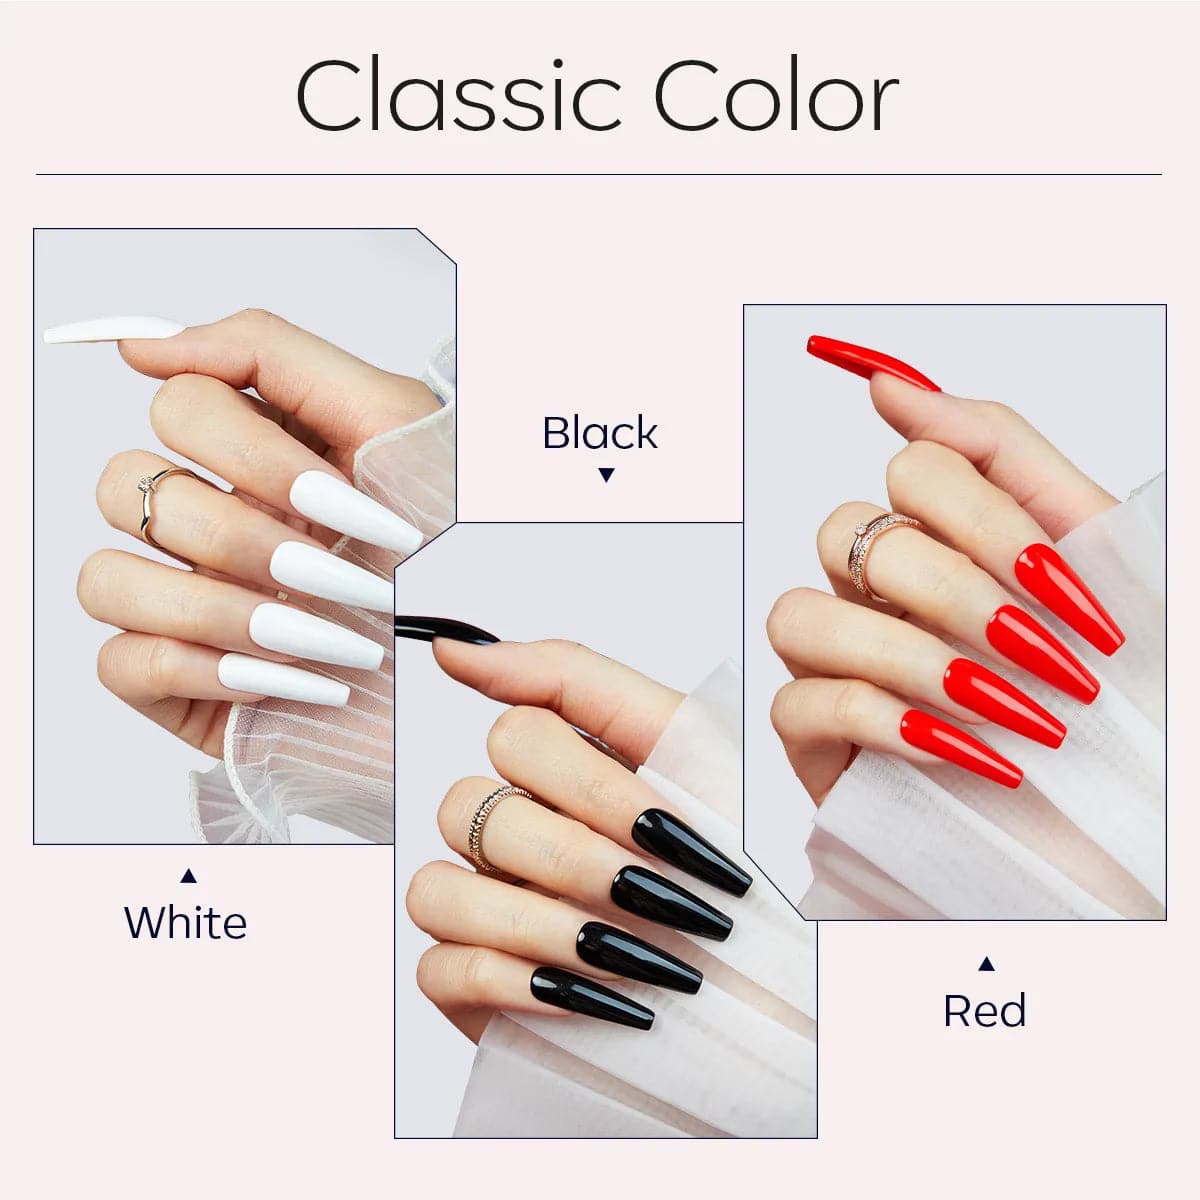 All In One - Single Solid Cream Gel Polish Color Cube Collection【Buy 5 get 1 free gift】